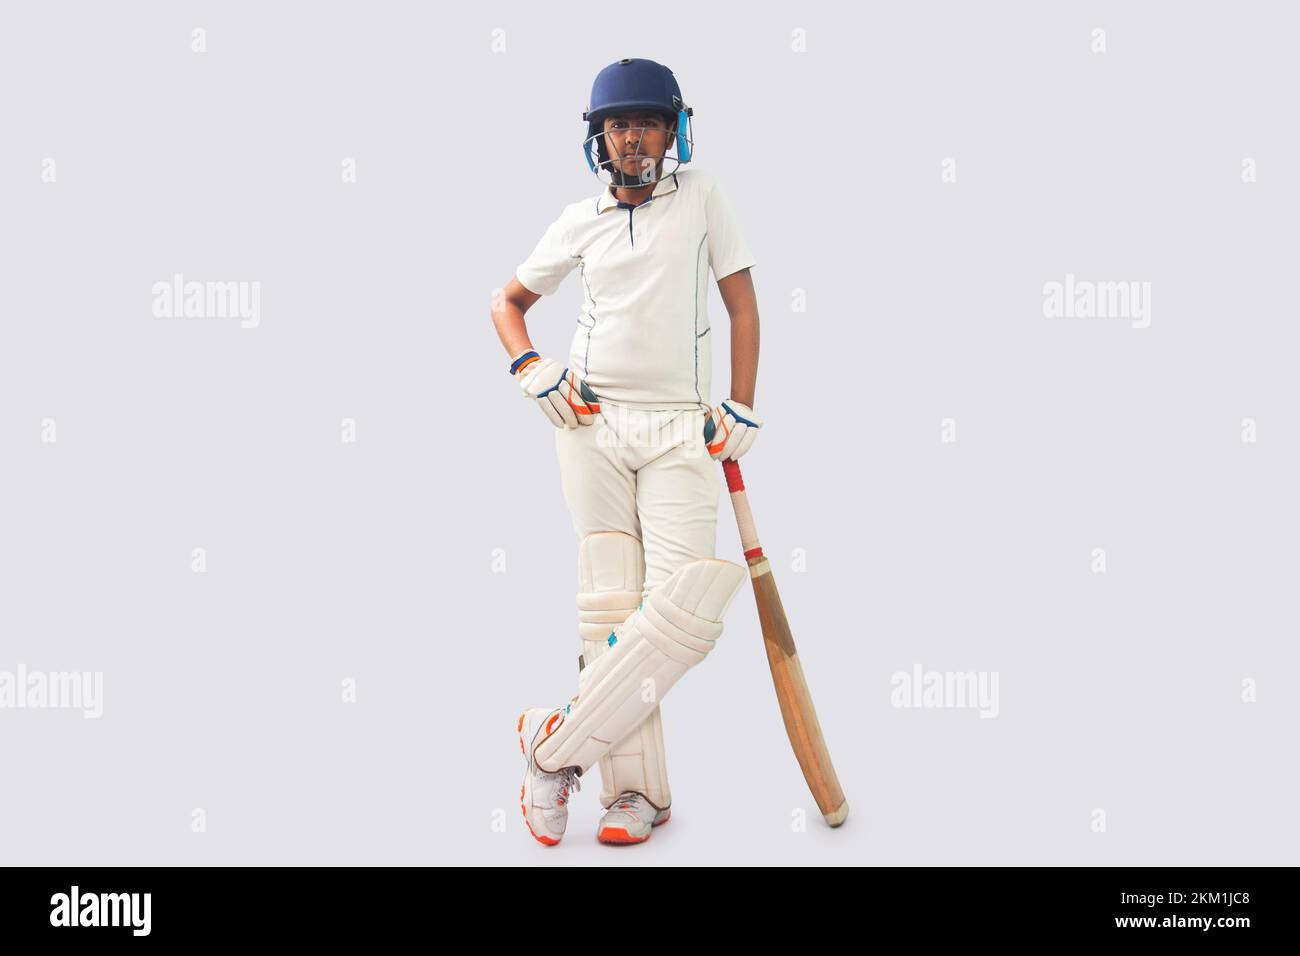 full length of a boy in cricket uniform  standing with bat Stock Photo